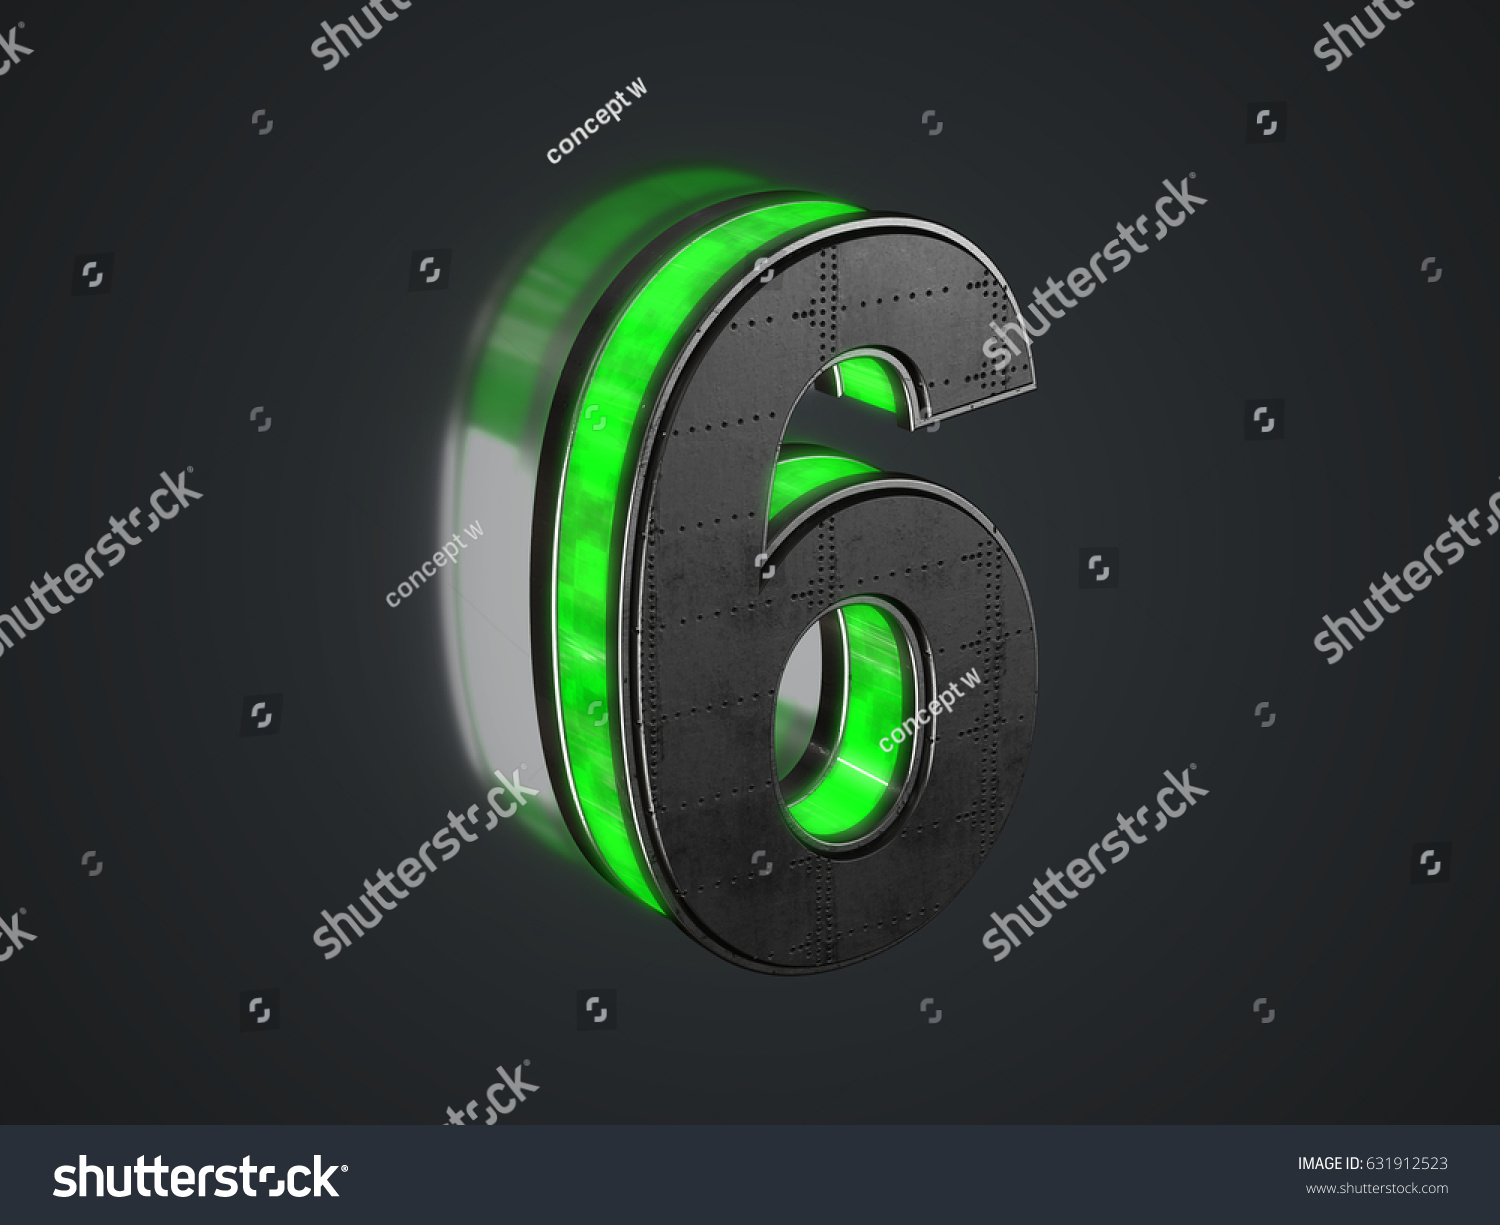 Futuristic number 6 - black metallic extruded number with green light outline glowing in the dark - 3D render #631912523